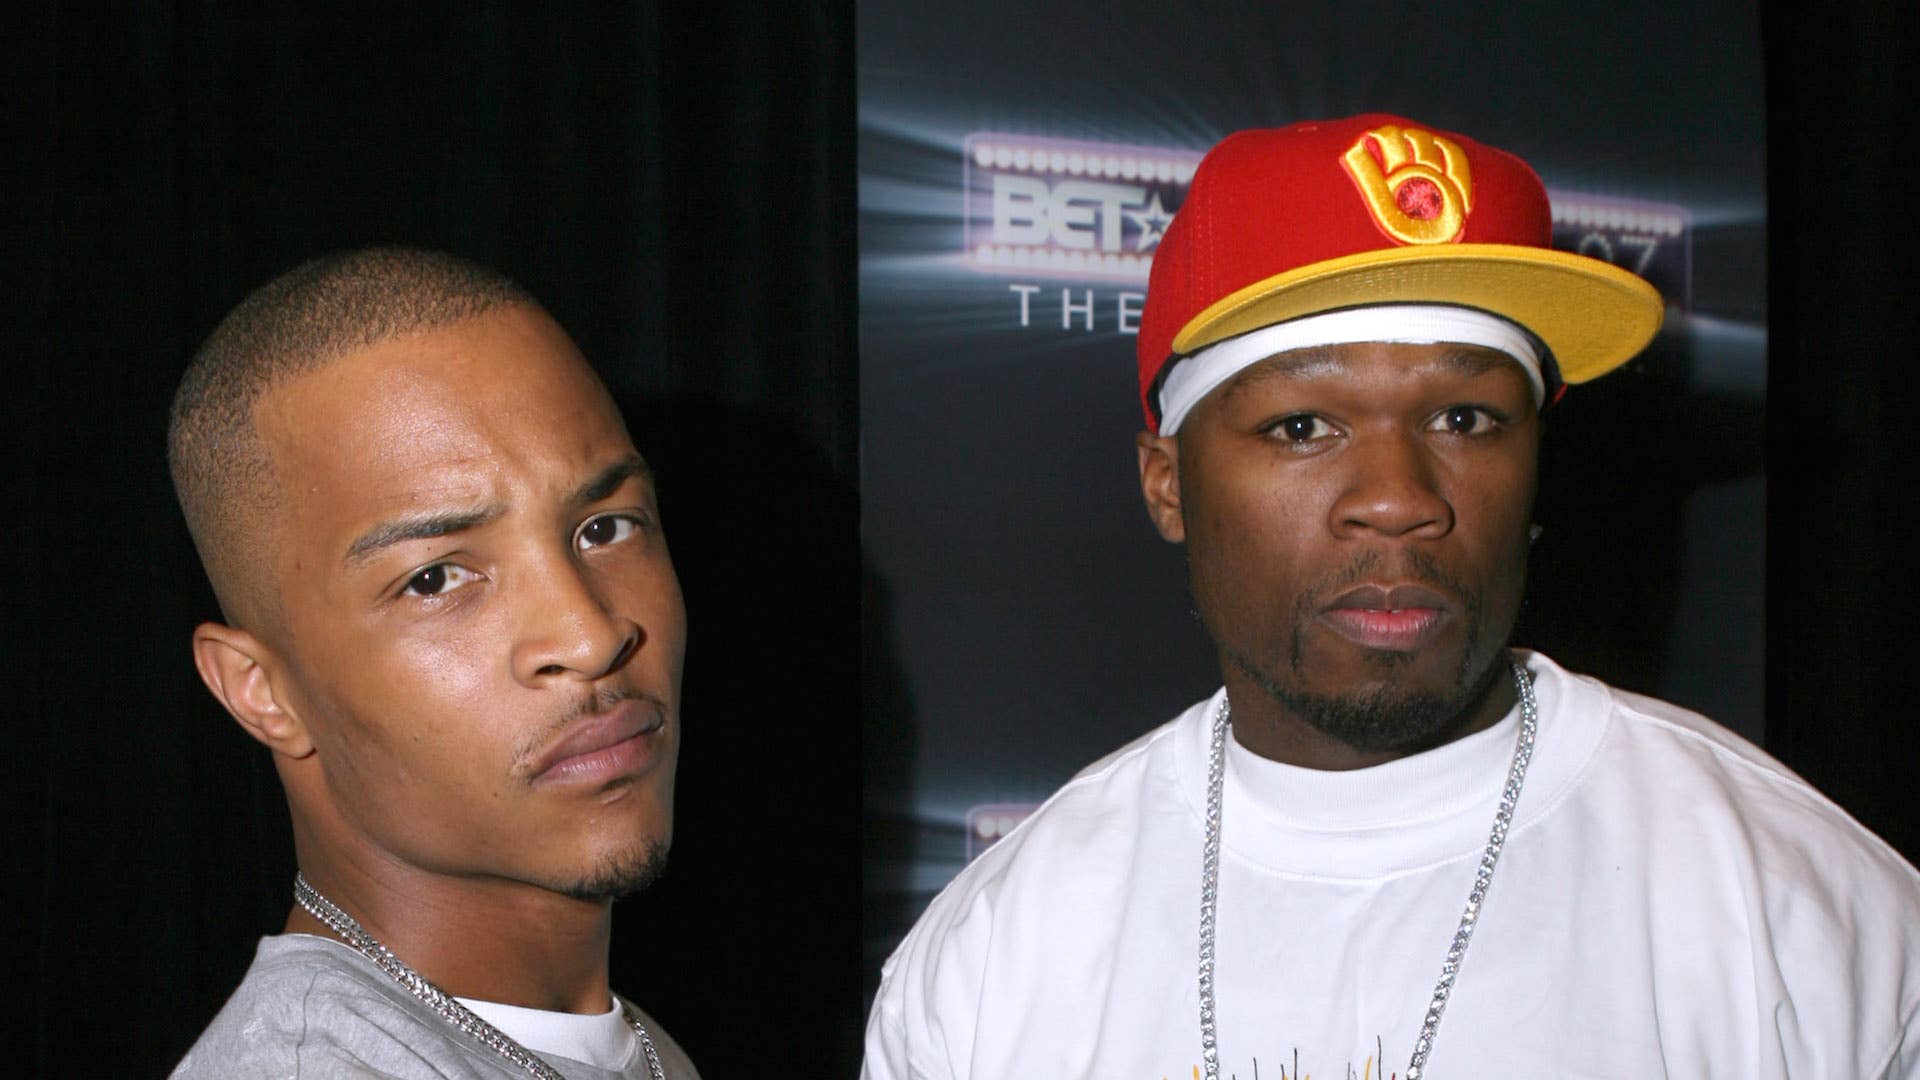 T.I. and 50 Cent